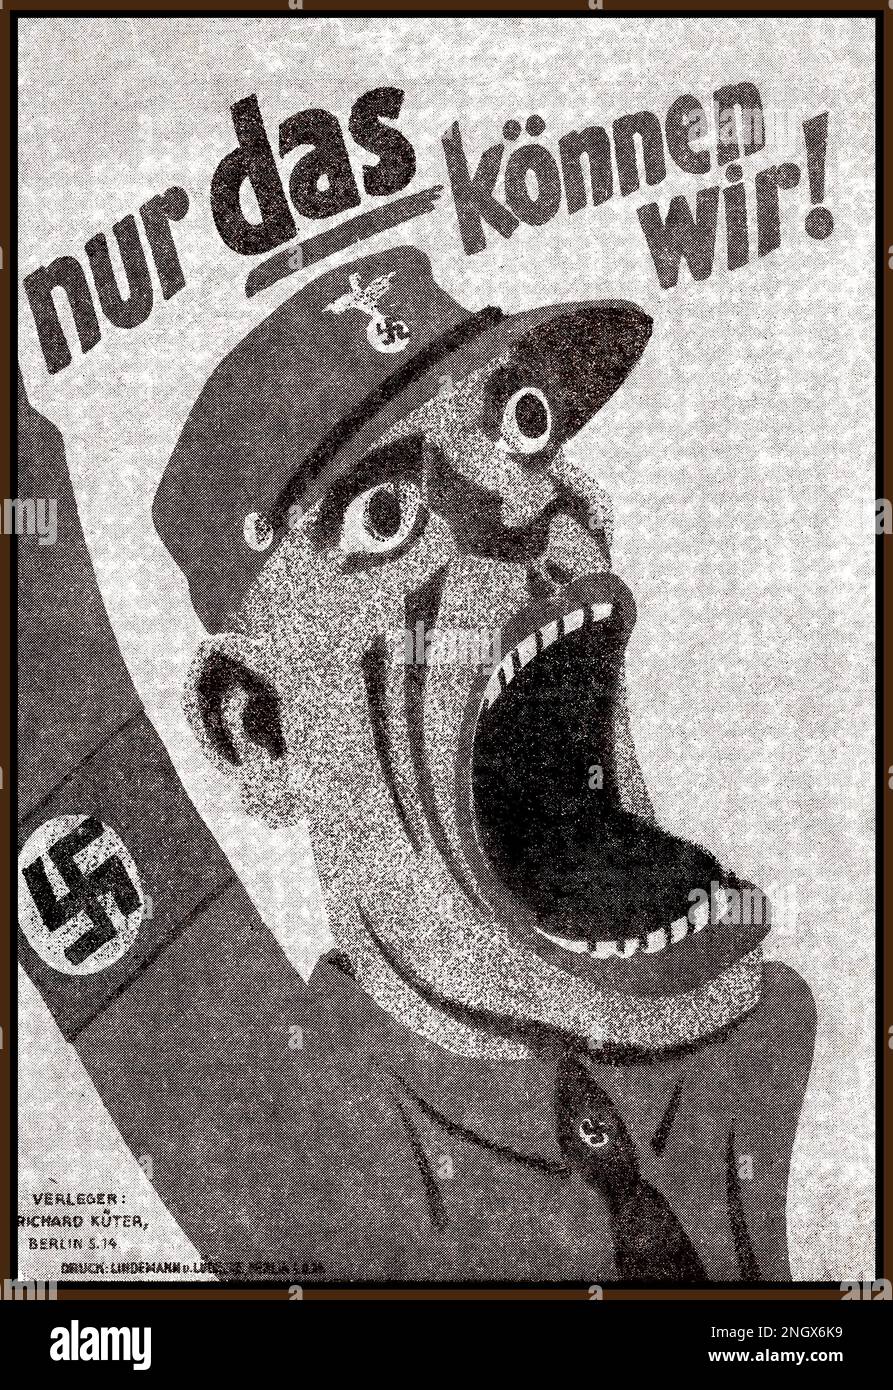 Nazi 1930s Sturmabteilung propaganda poster card 'that's all we can do' ( nur das können wir) with paramilitary soldier with swastika armband and cap, cartoon caricature shouting out his recruiting phrase. Nazi Germany 1930s Stock Photo